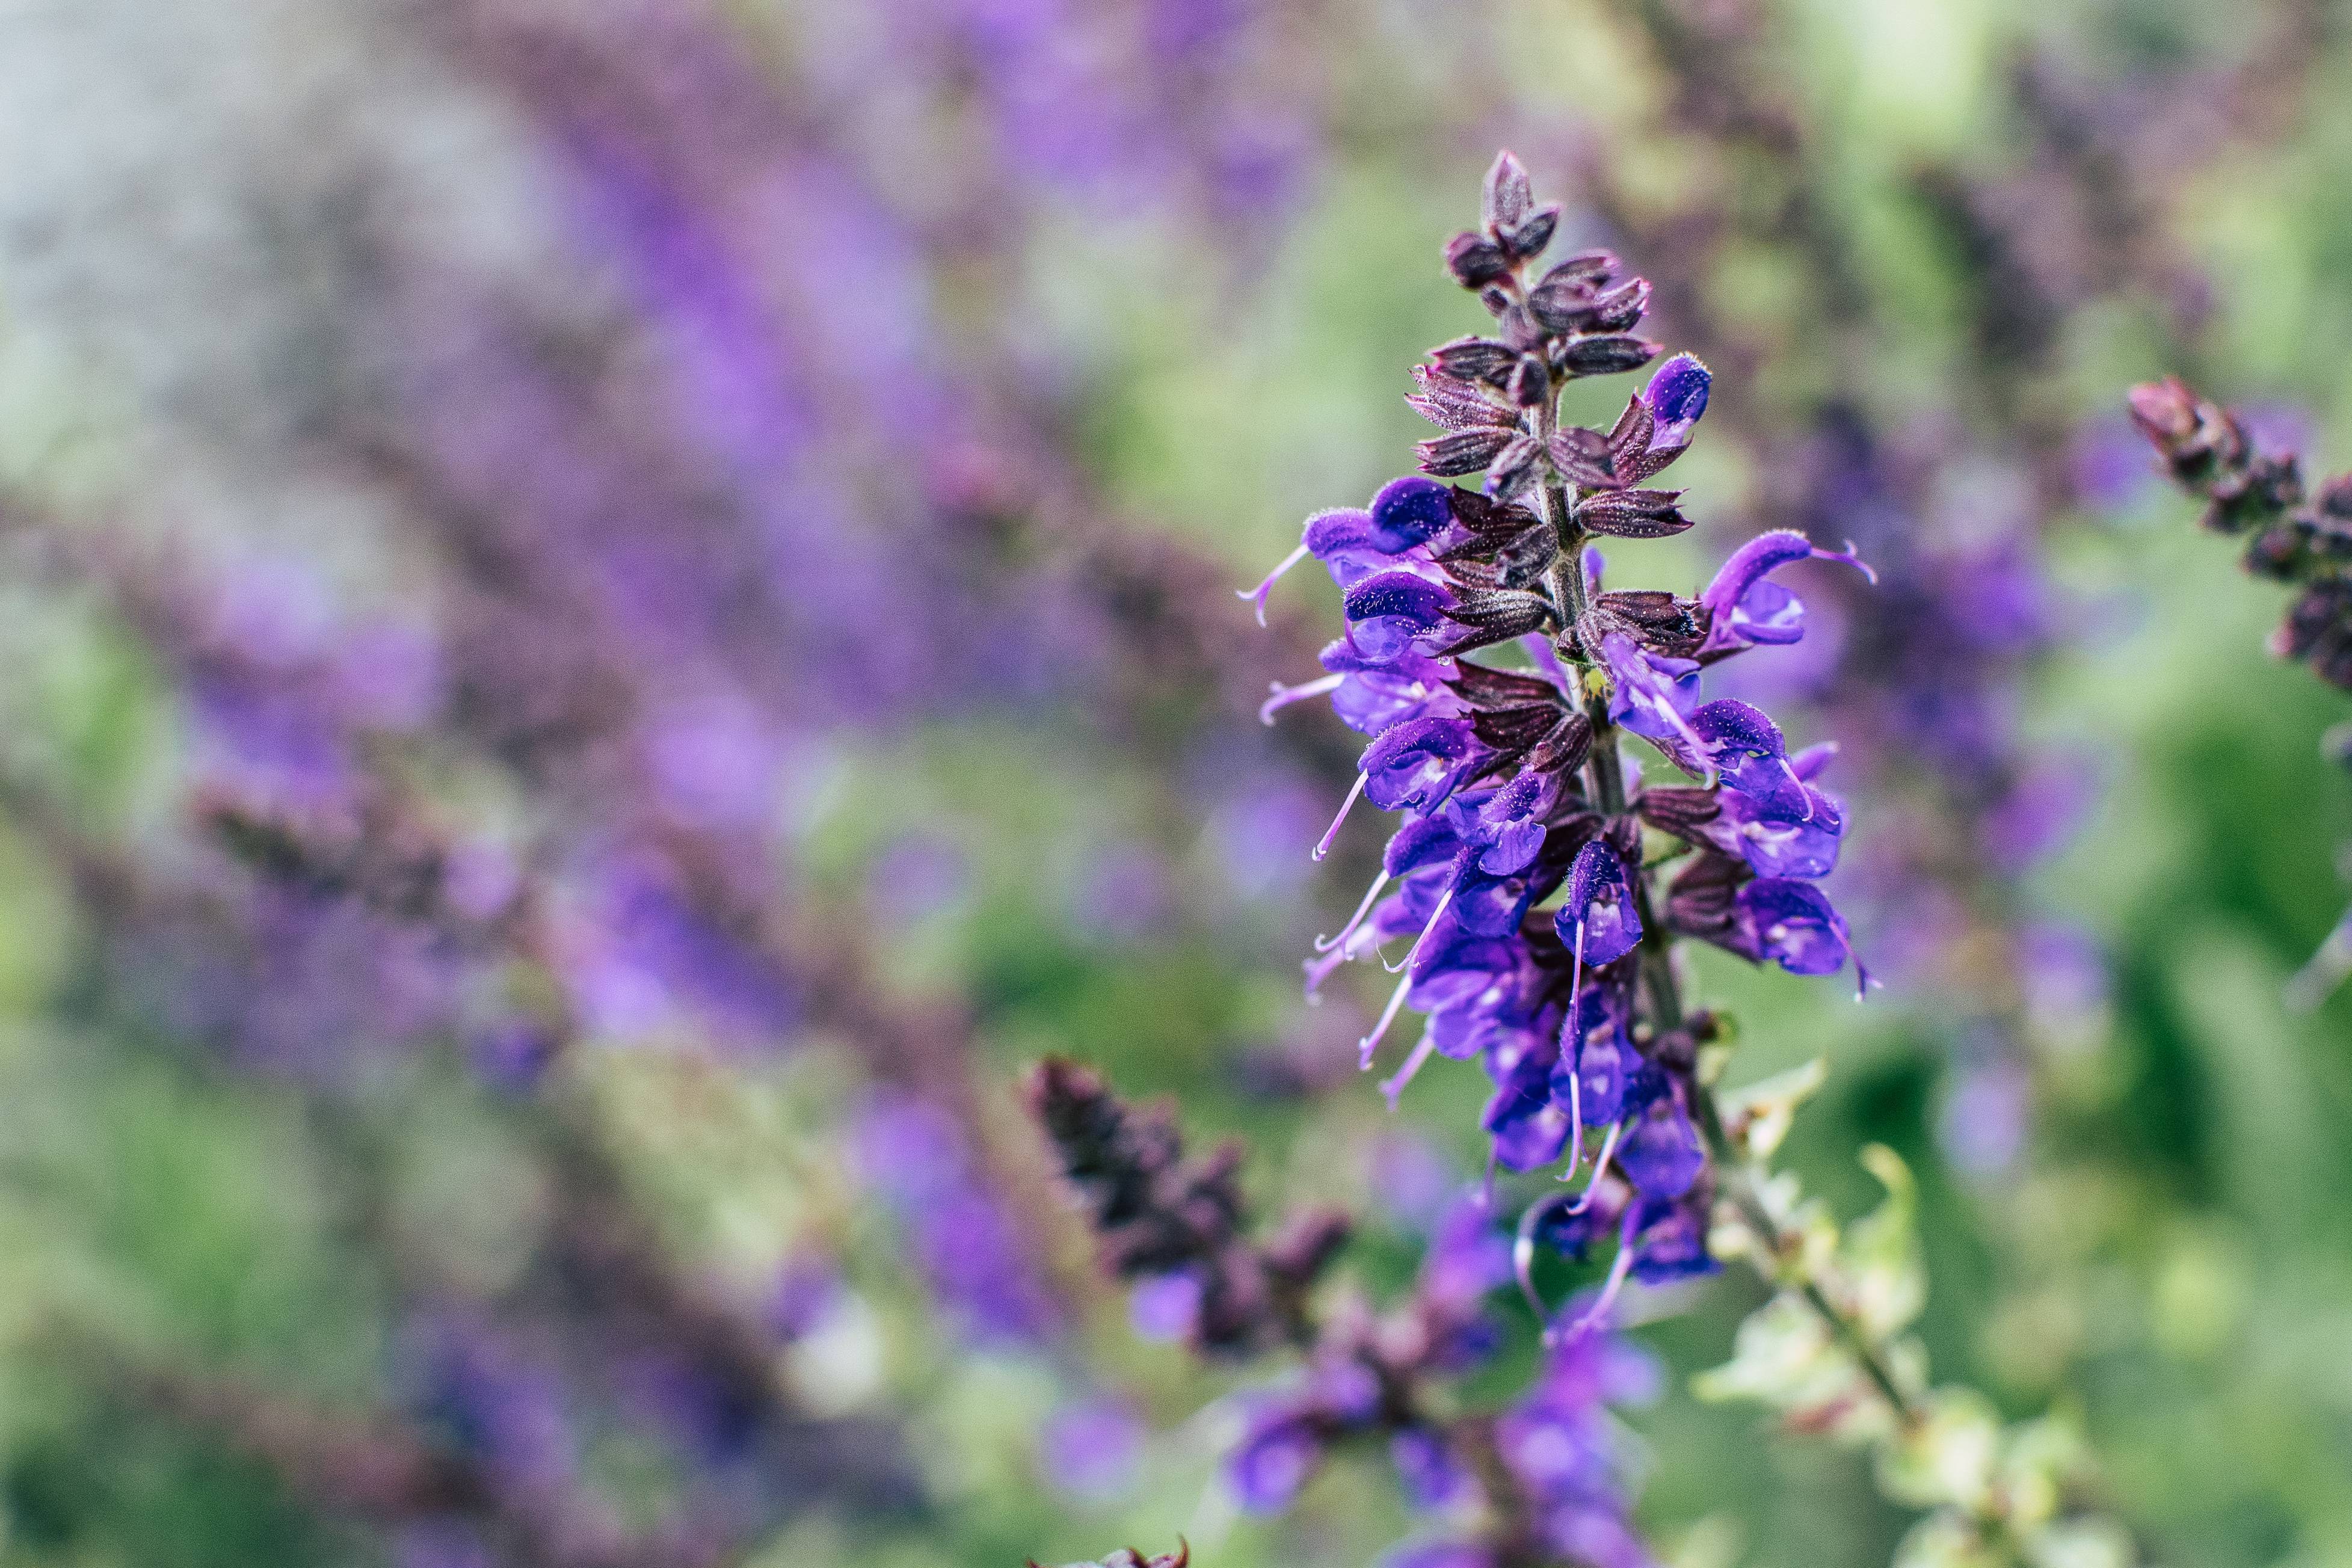 blue-purple flowers with dark-purple sepals and stems